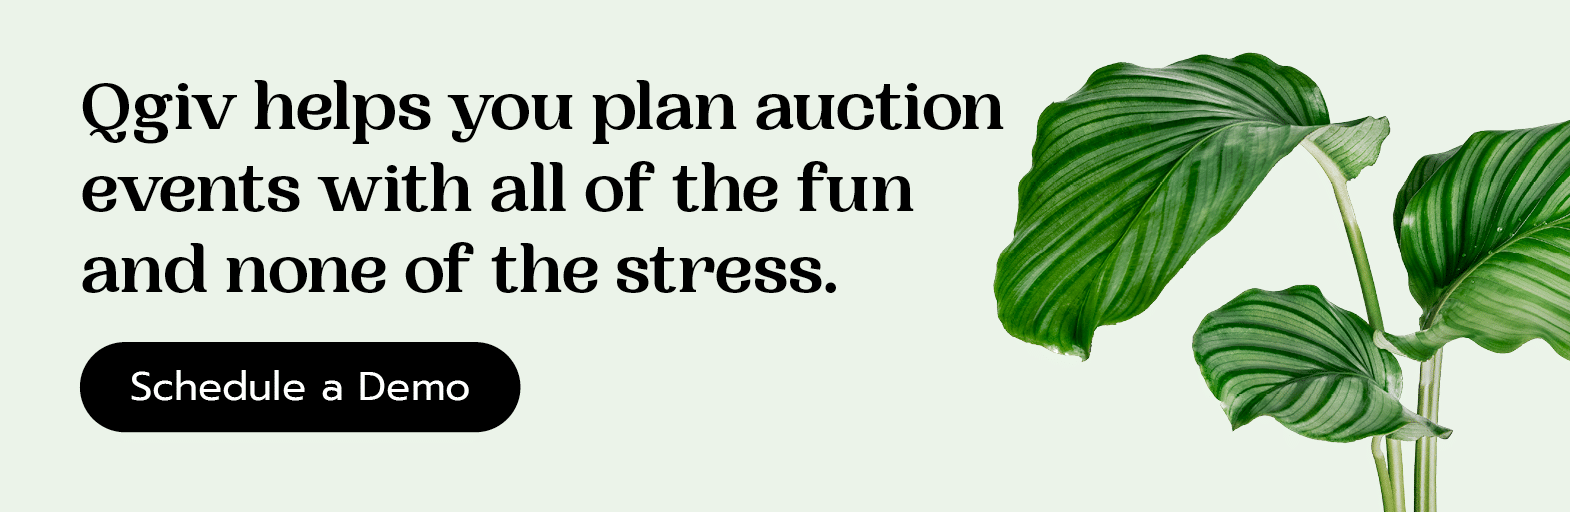 Qgiv helps you plan auction events with all of the fun and none of the stress. Schedule a demo here.